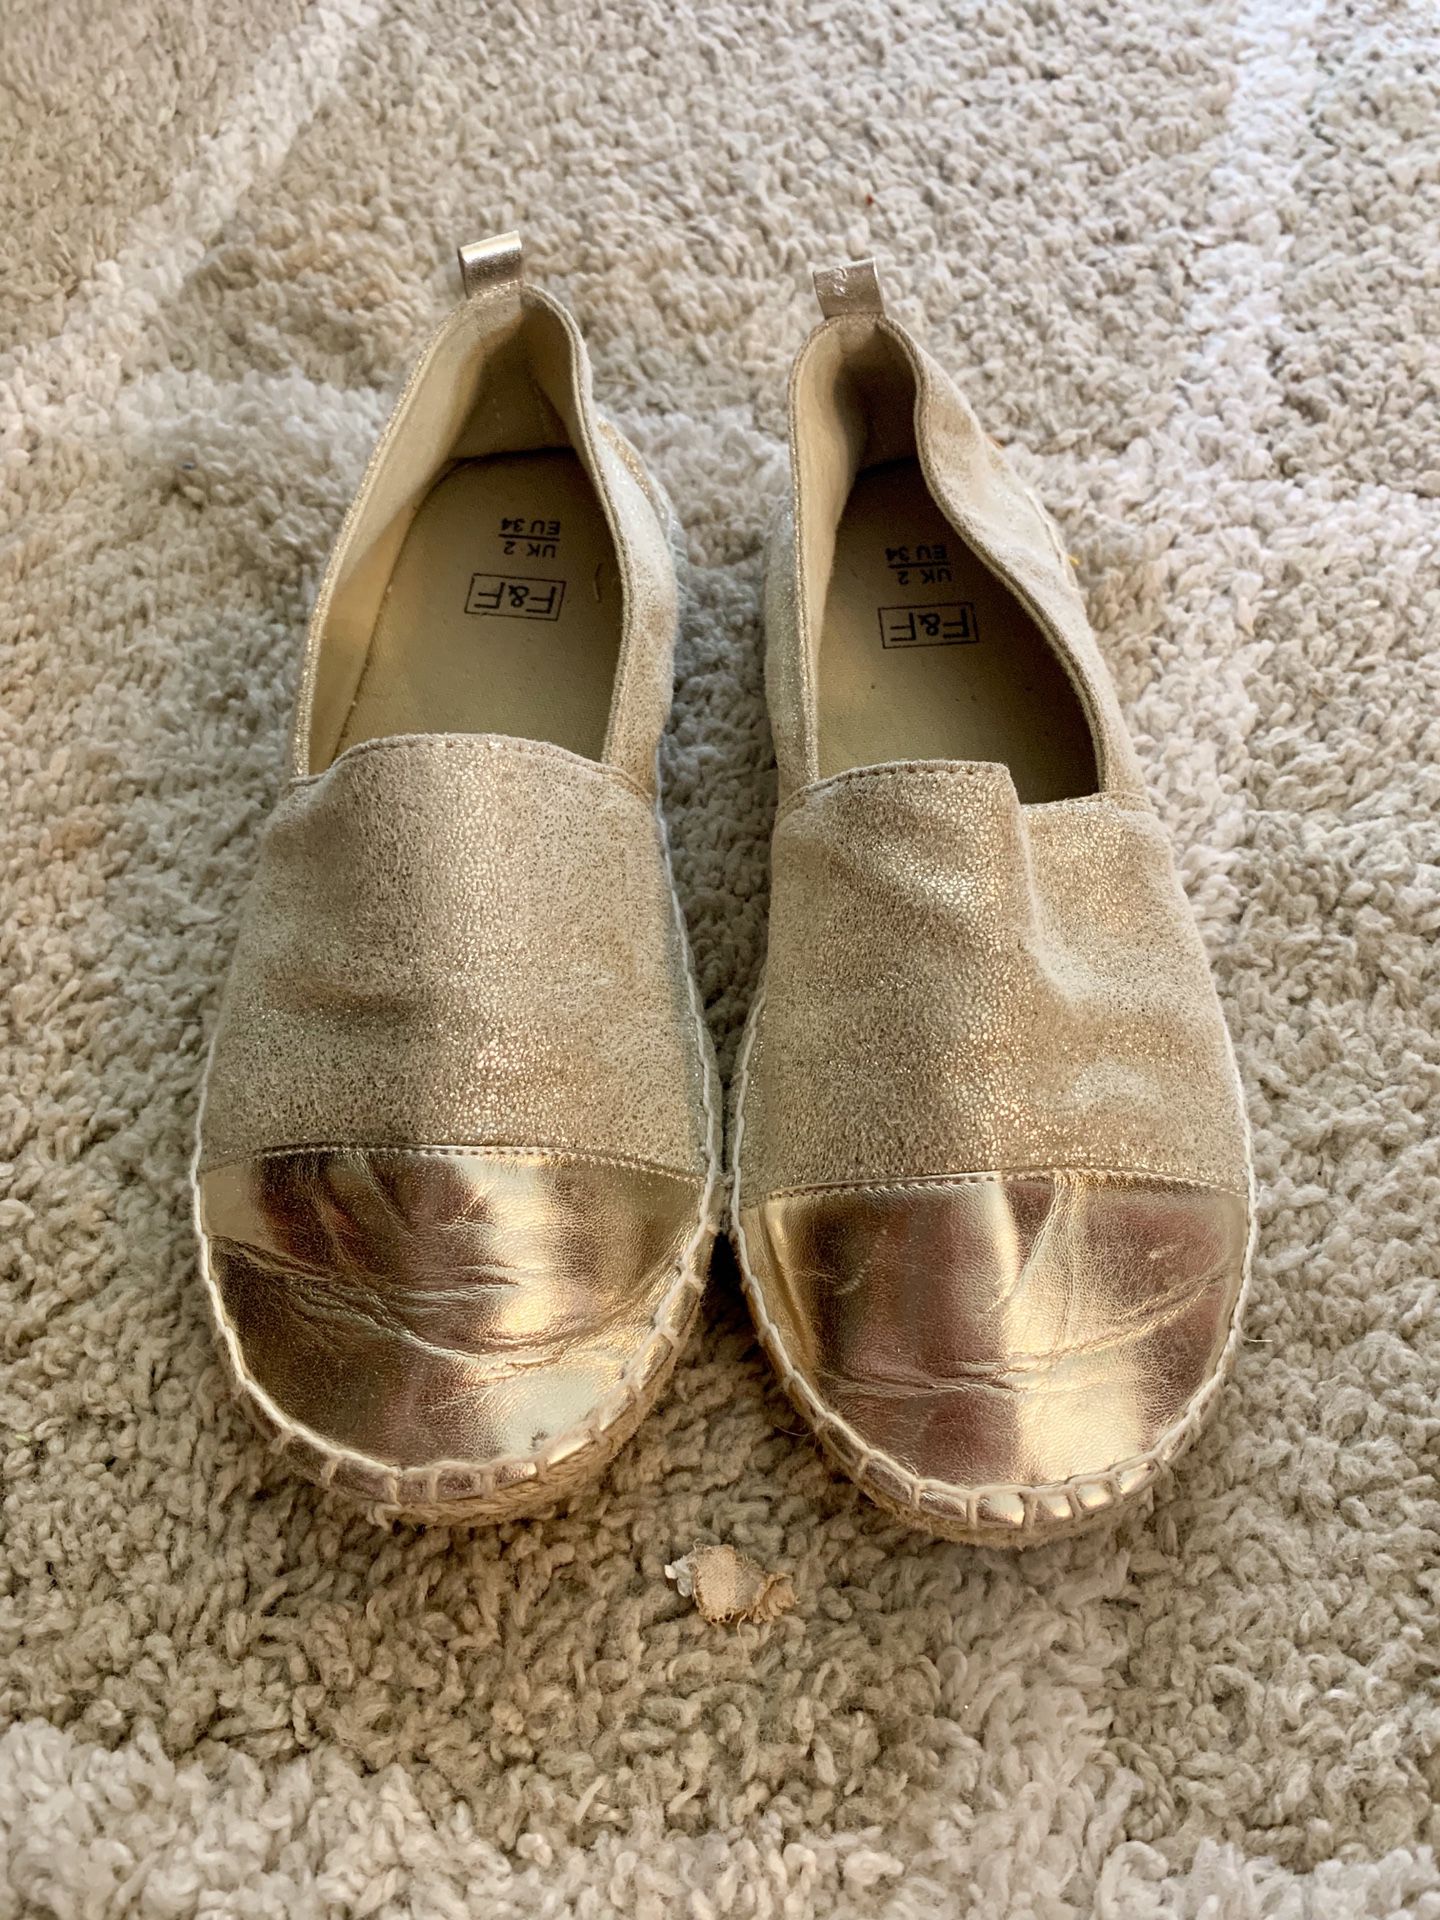 F&F girls shoes size 3